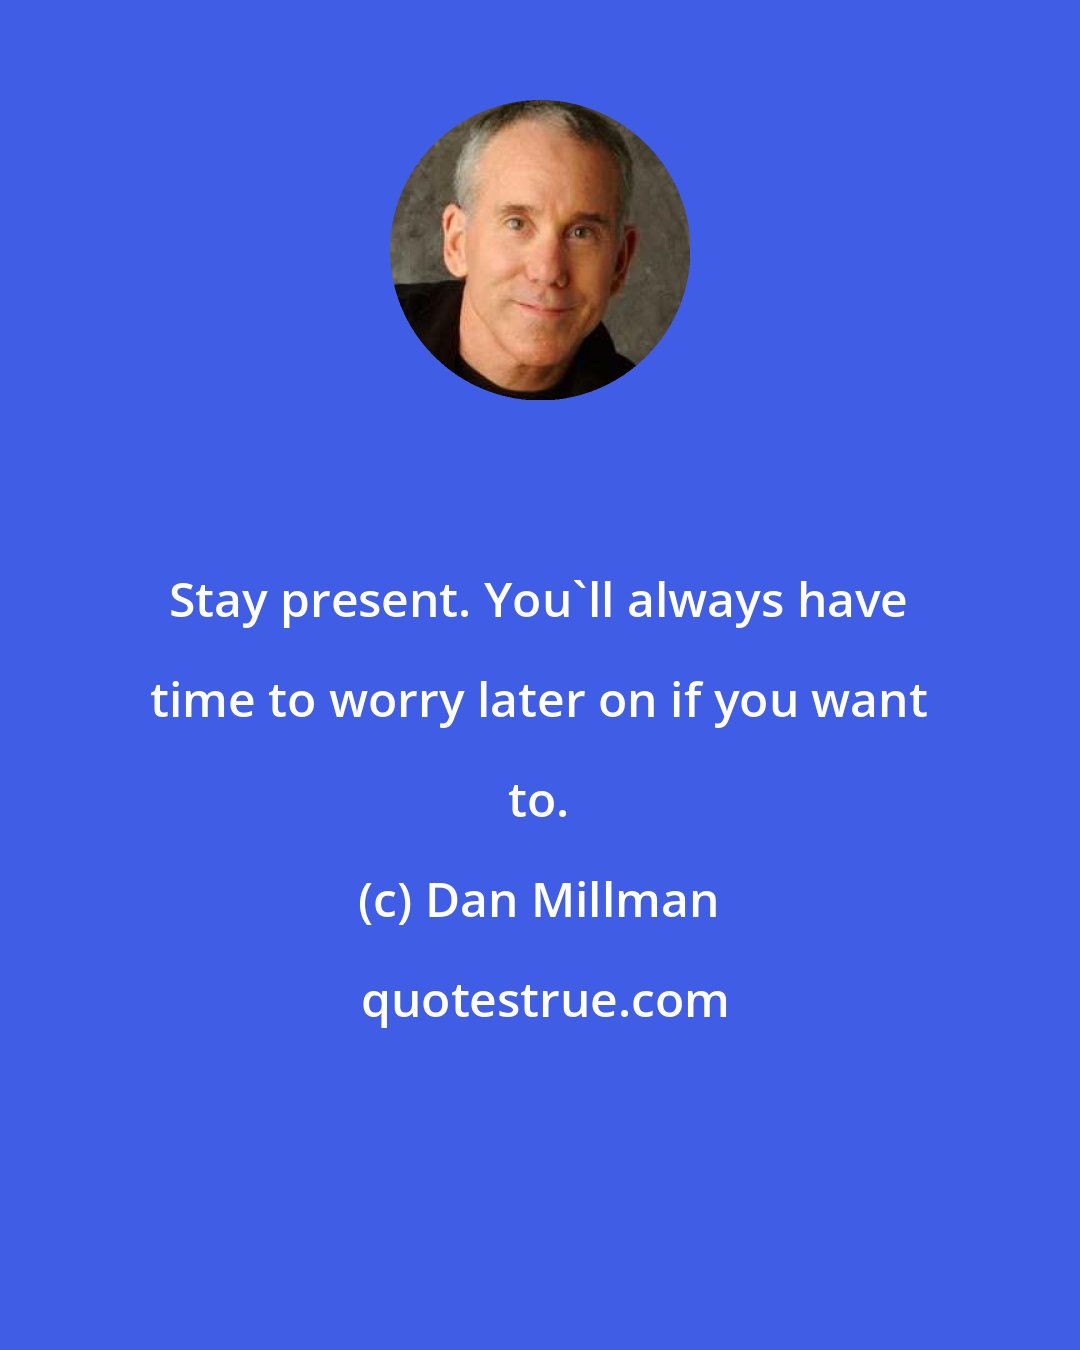 Dan Millman: Stay present. You'll always have time to worry later on if you want to.